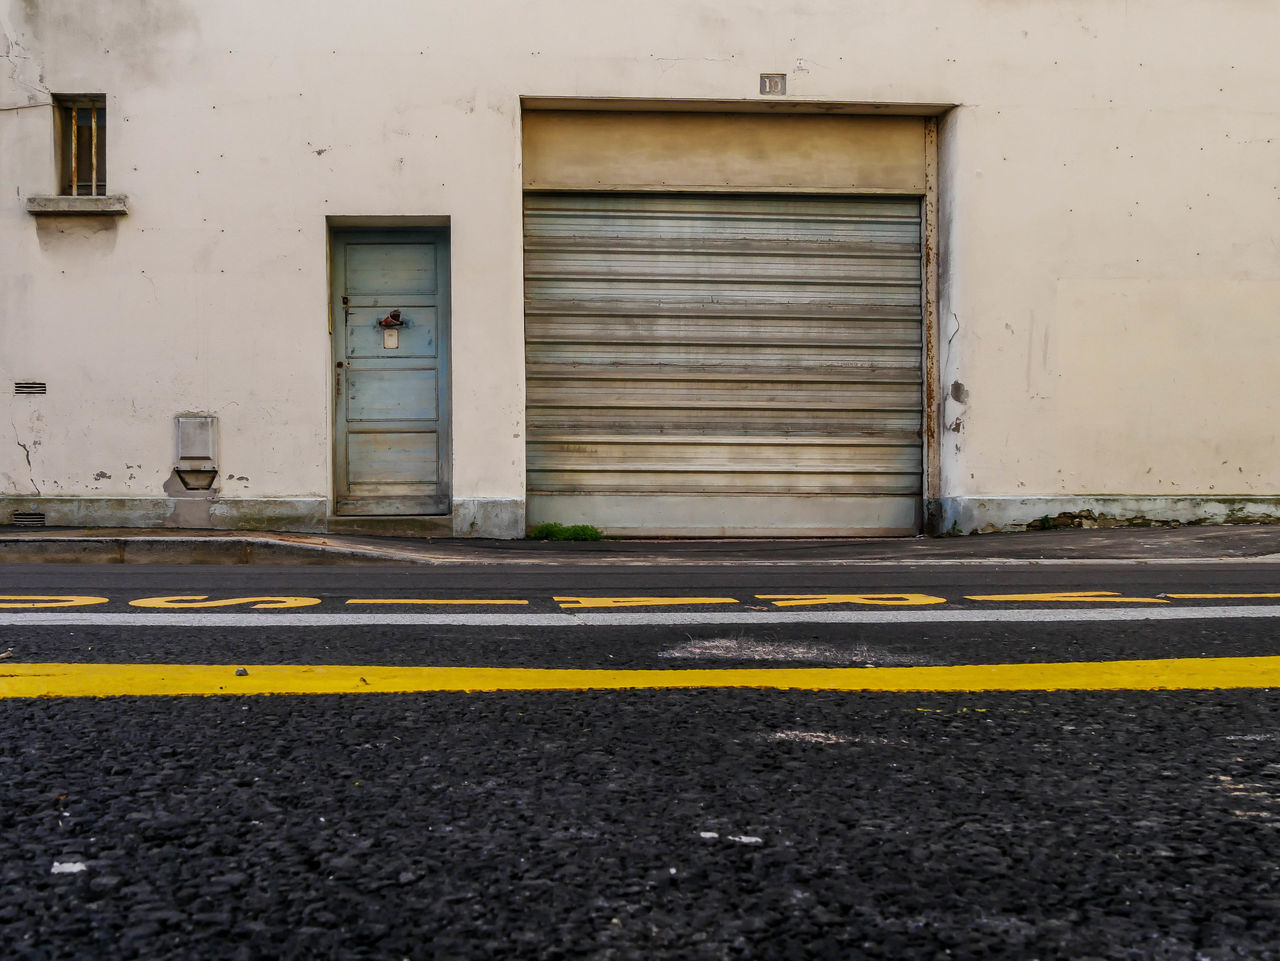 architecture, built structure, building exterior, city, transportation, building, entrance, door, no people, sign, road, street, day, yellow, closed, road marking, outdoors, marking, empty, asphalt, dividing line